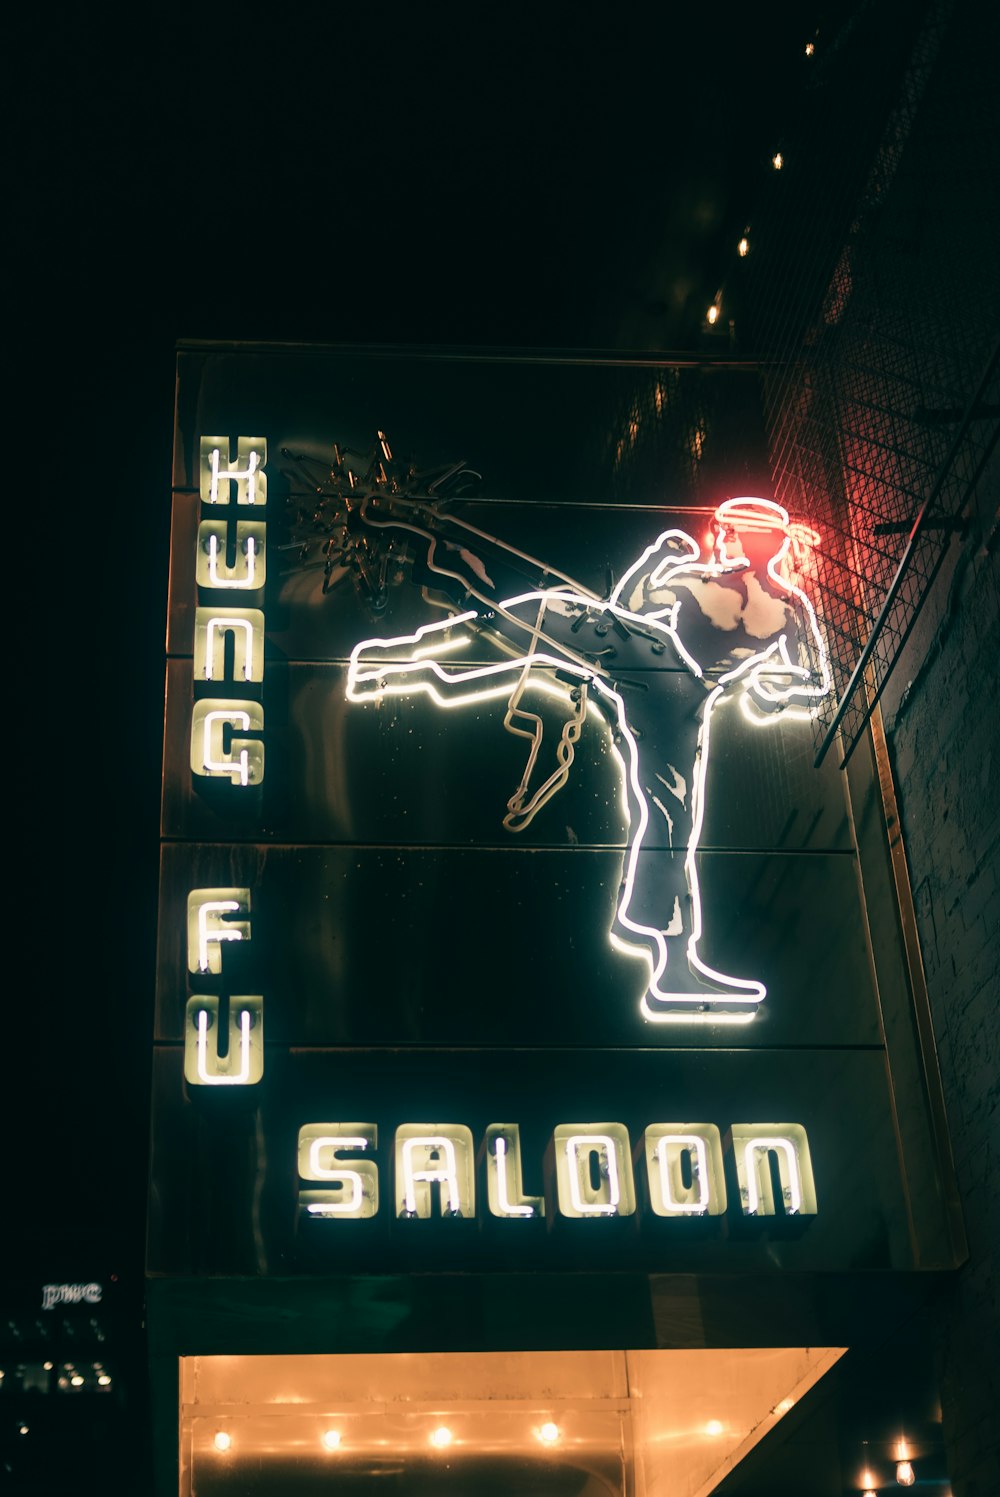 a neon sign for a restaurant called saloon